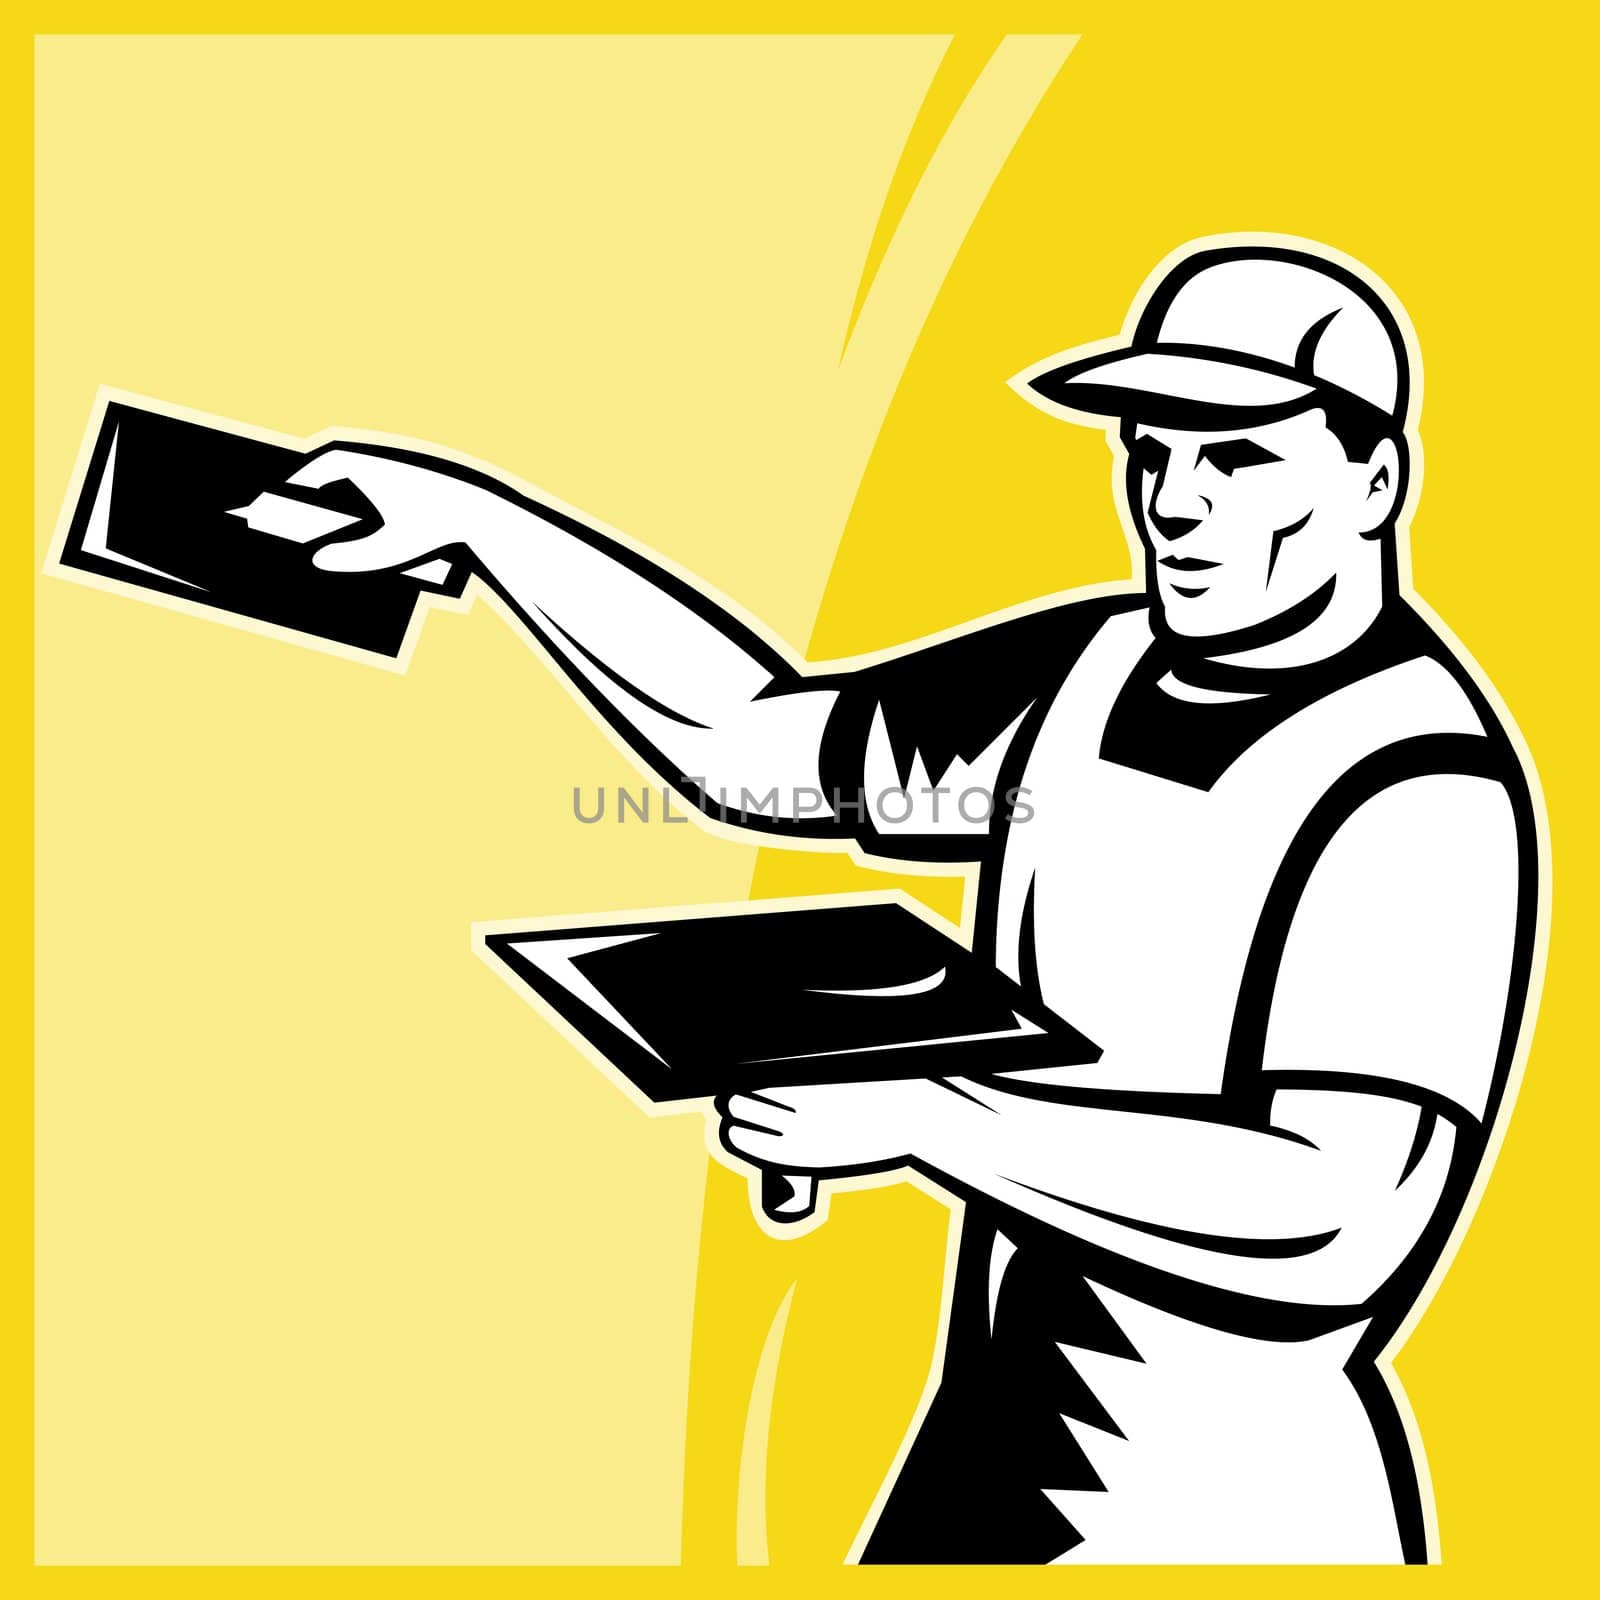 illustration of a tradesman worker plasterer at work done in retro style set inside a square